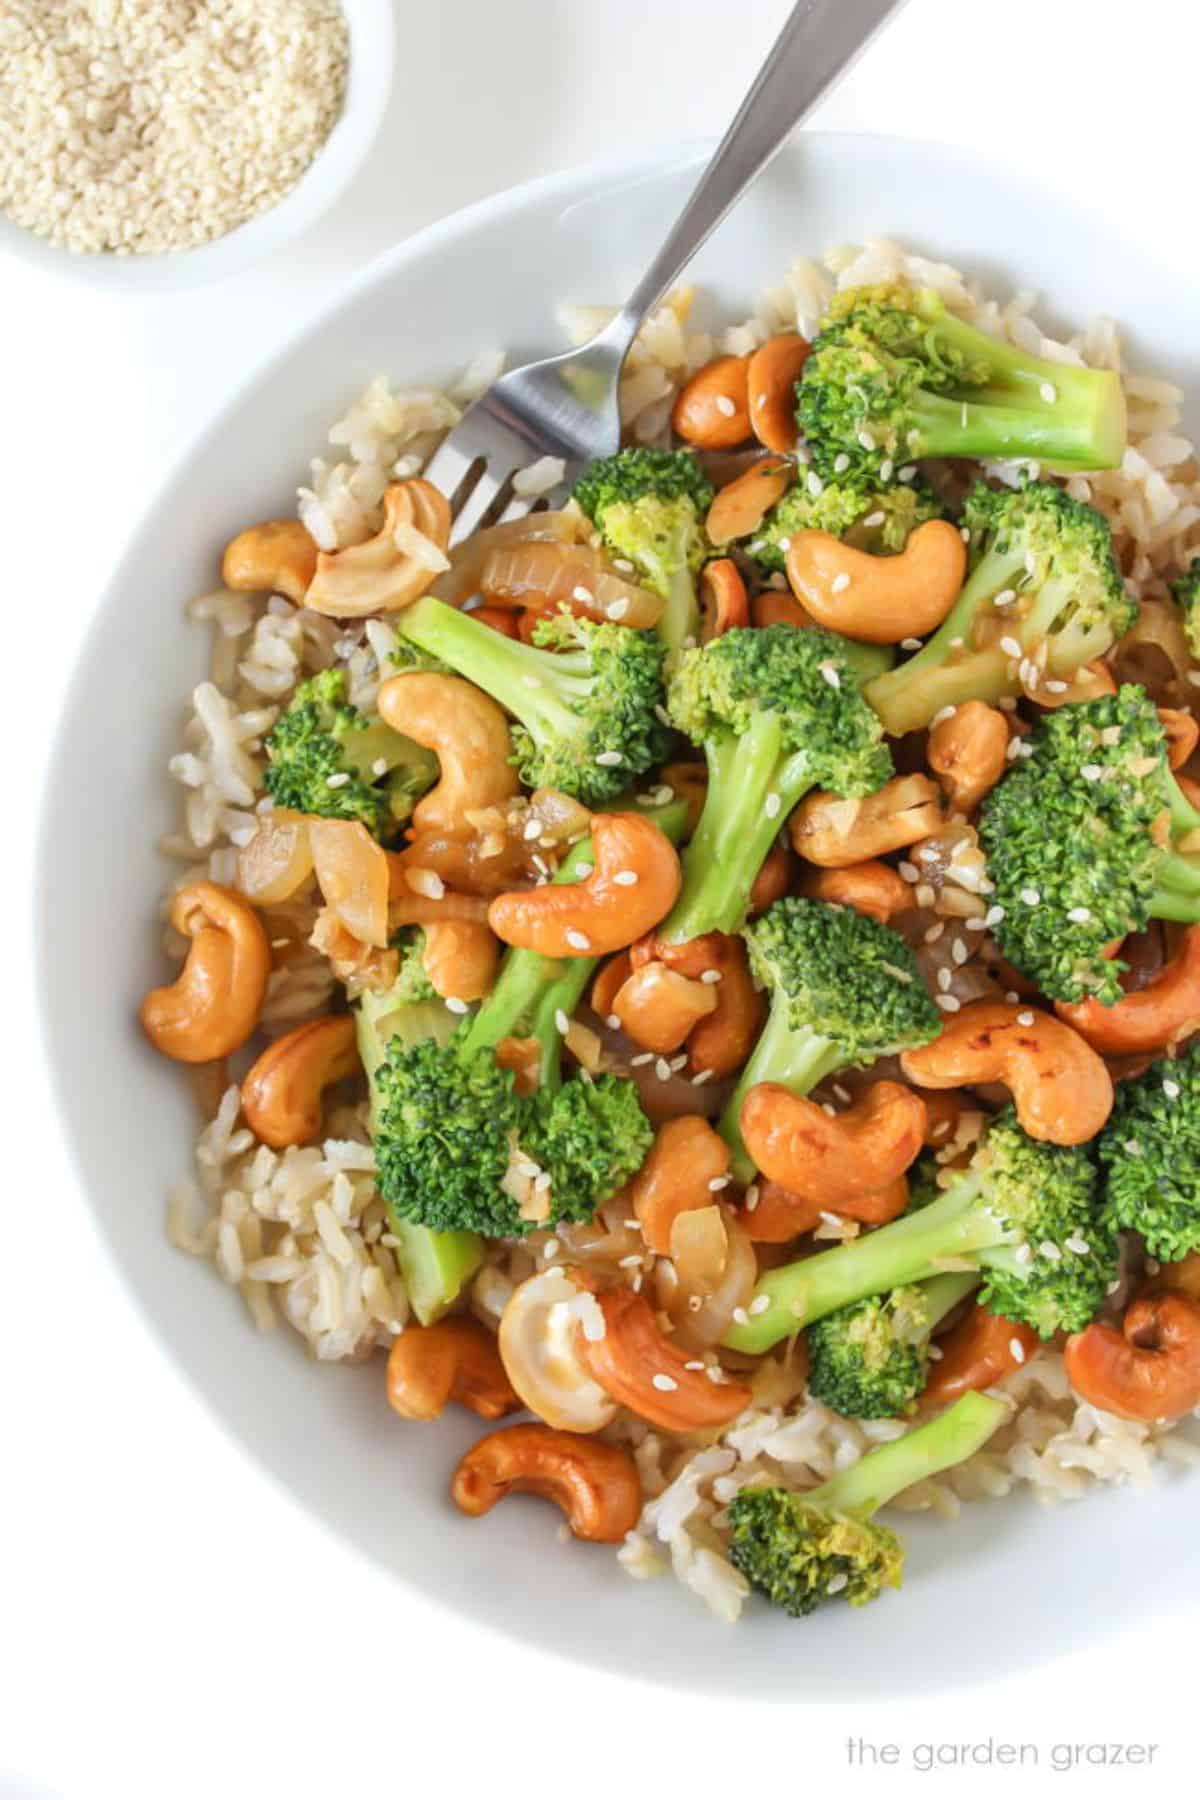 Broccoli Cashew Stir-Fry in a white bowl with a fork.